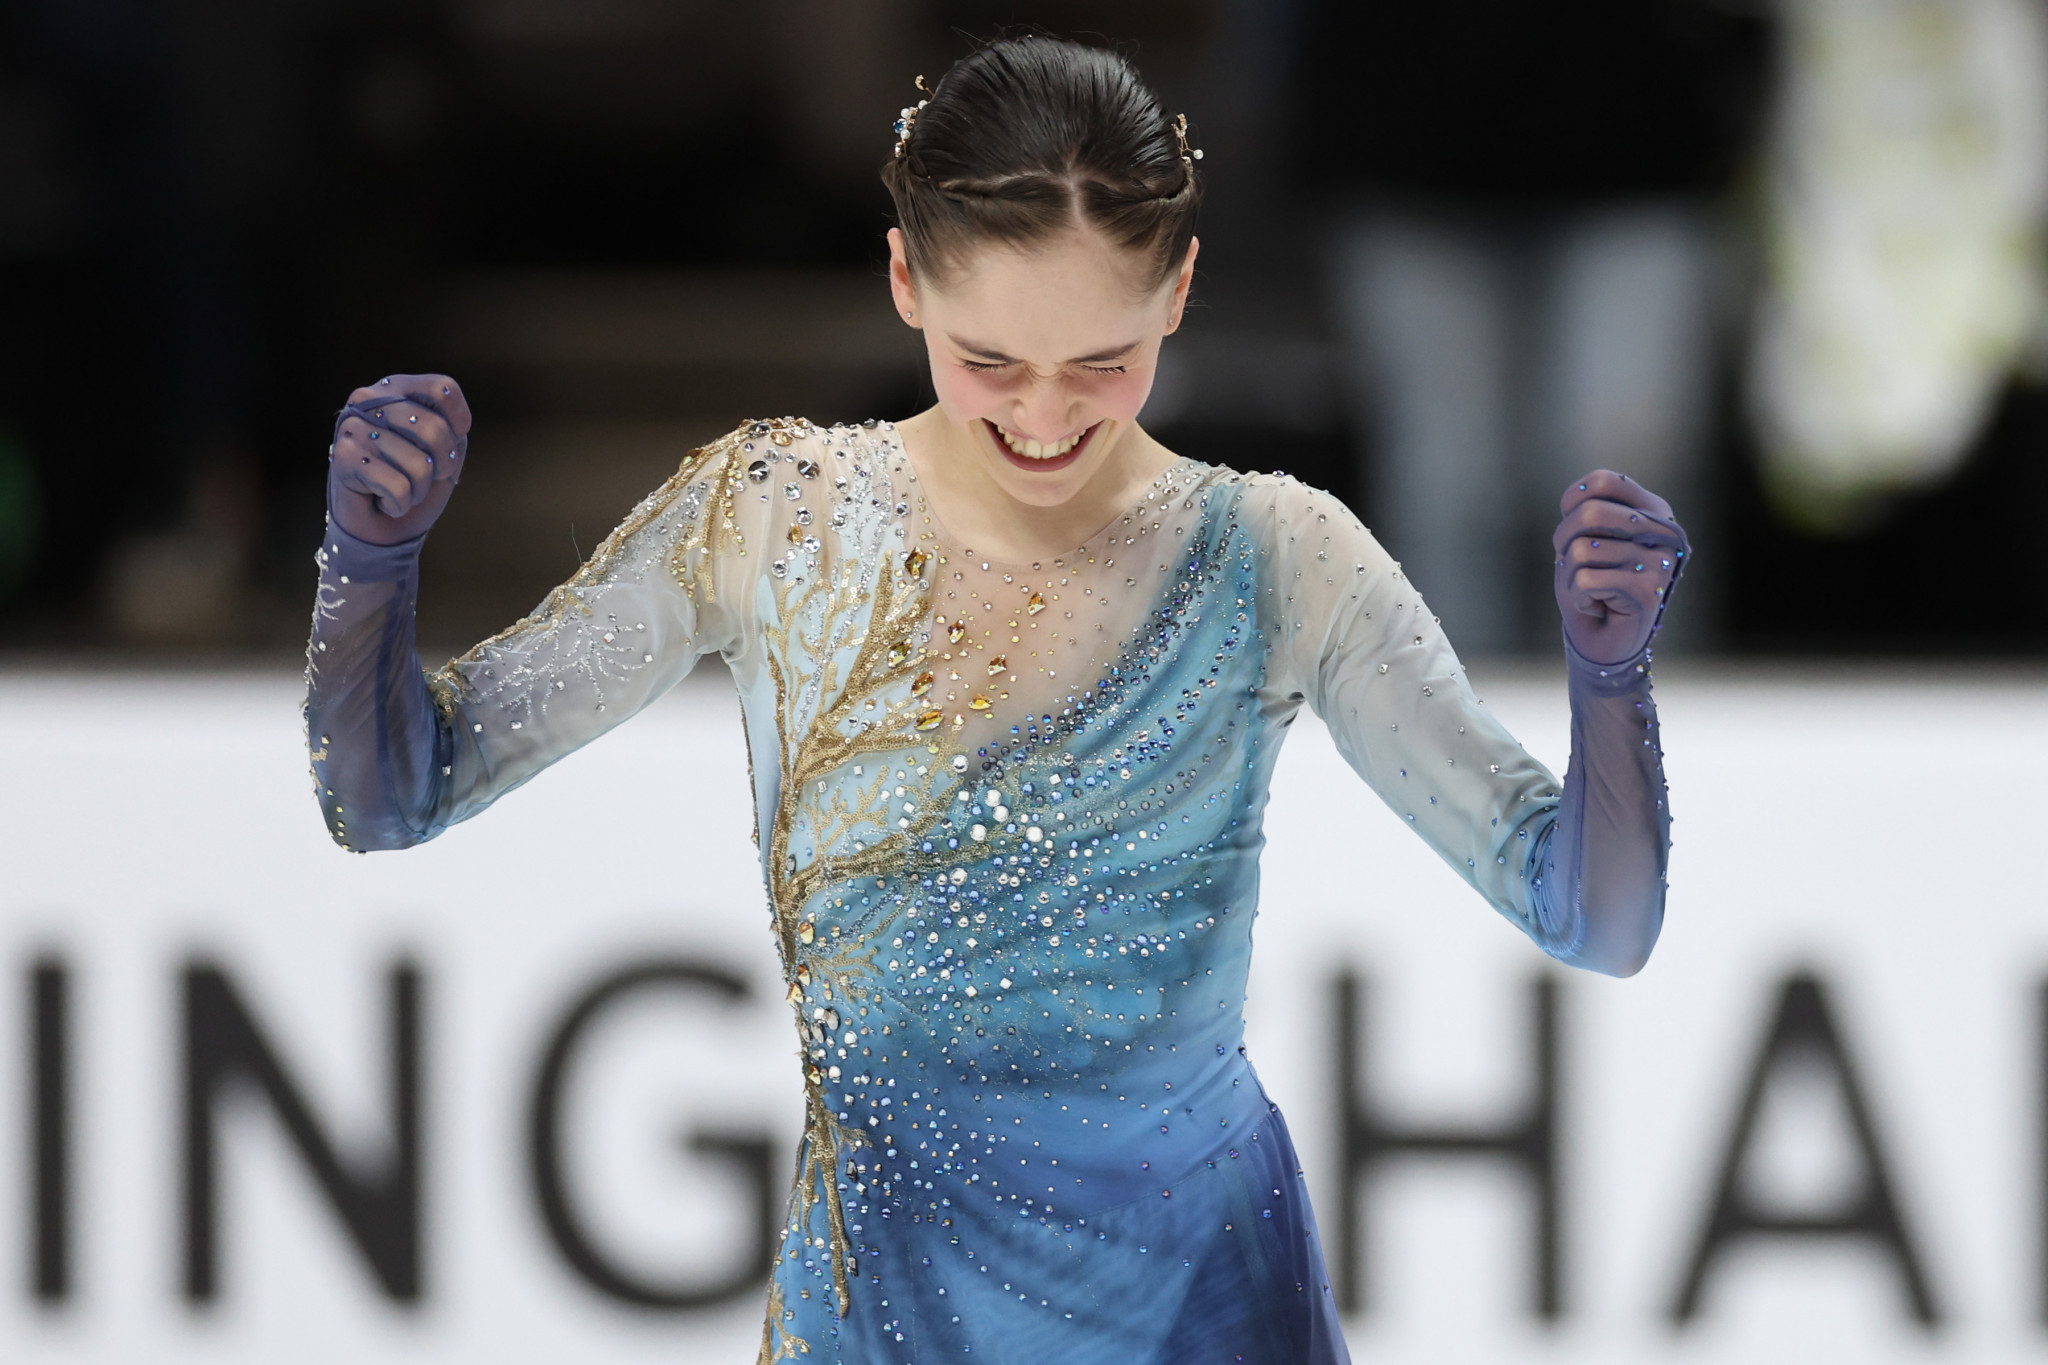 United States champion Isabeau Levito is expected to be one of the big attractions at the ISU Four Continents Championships ©Getty Images